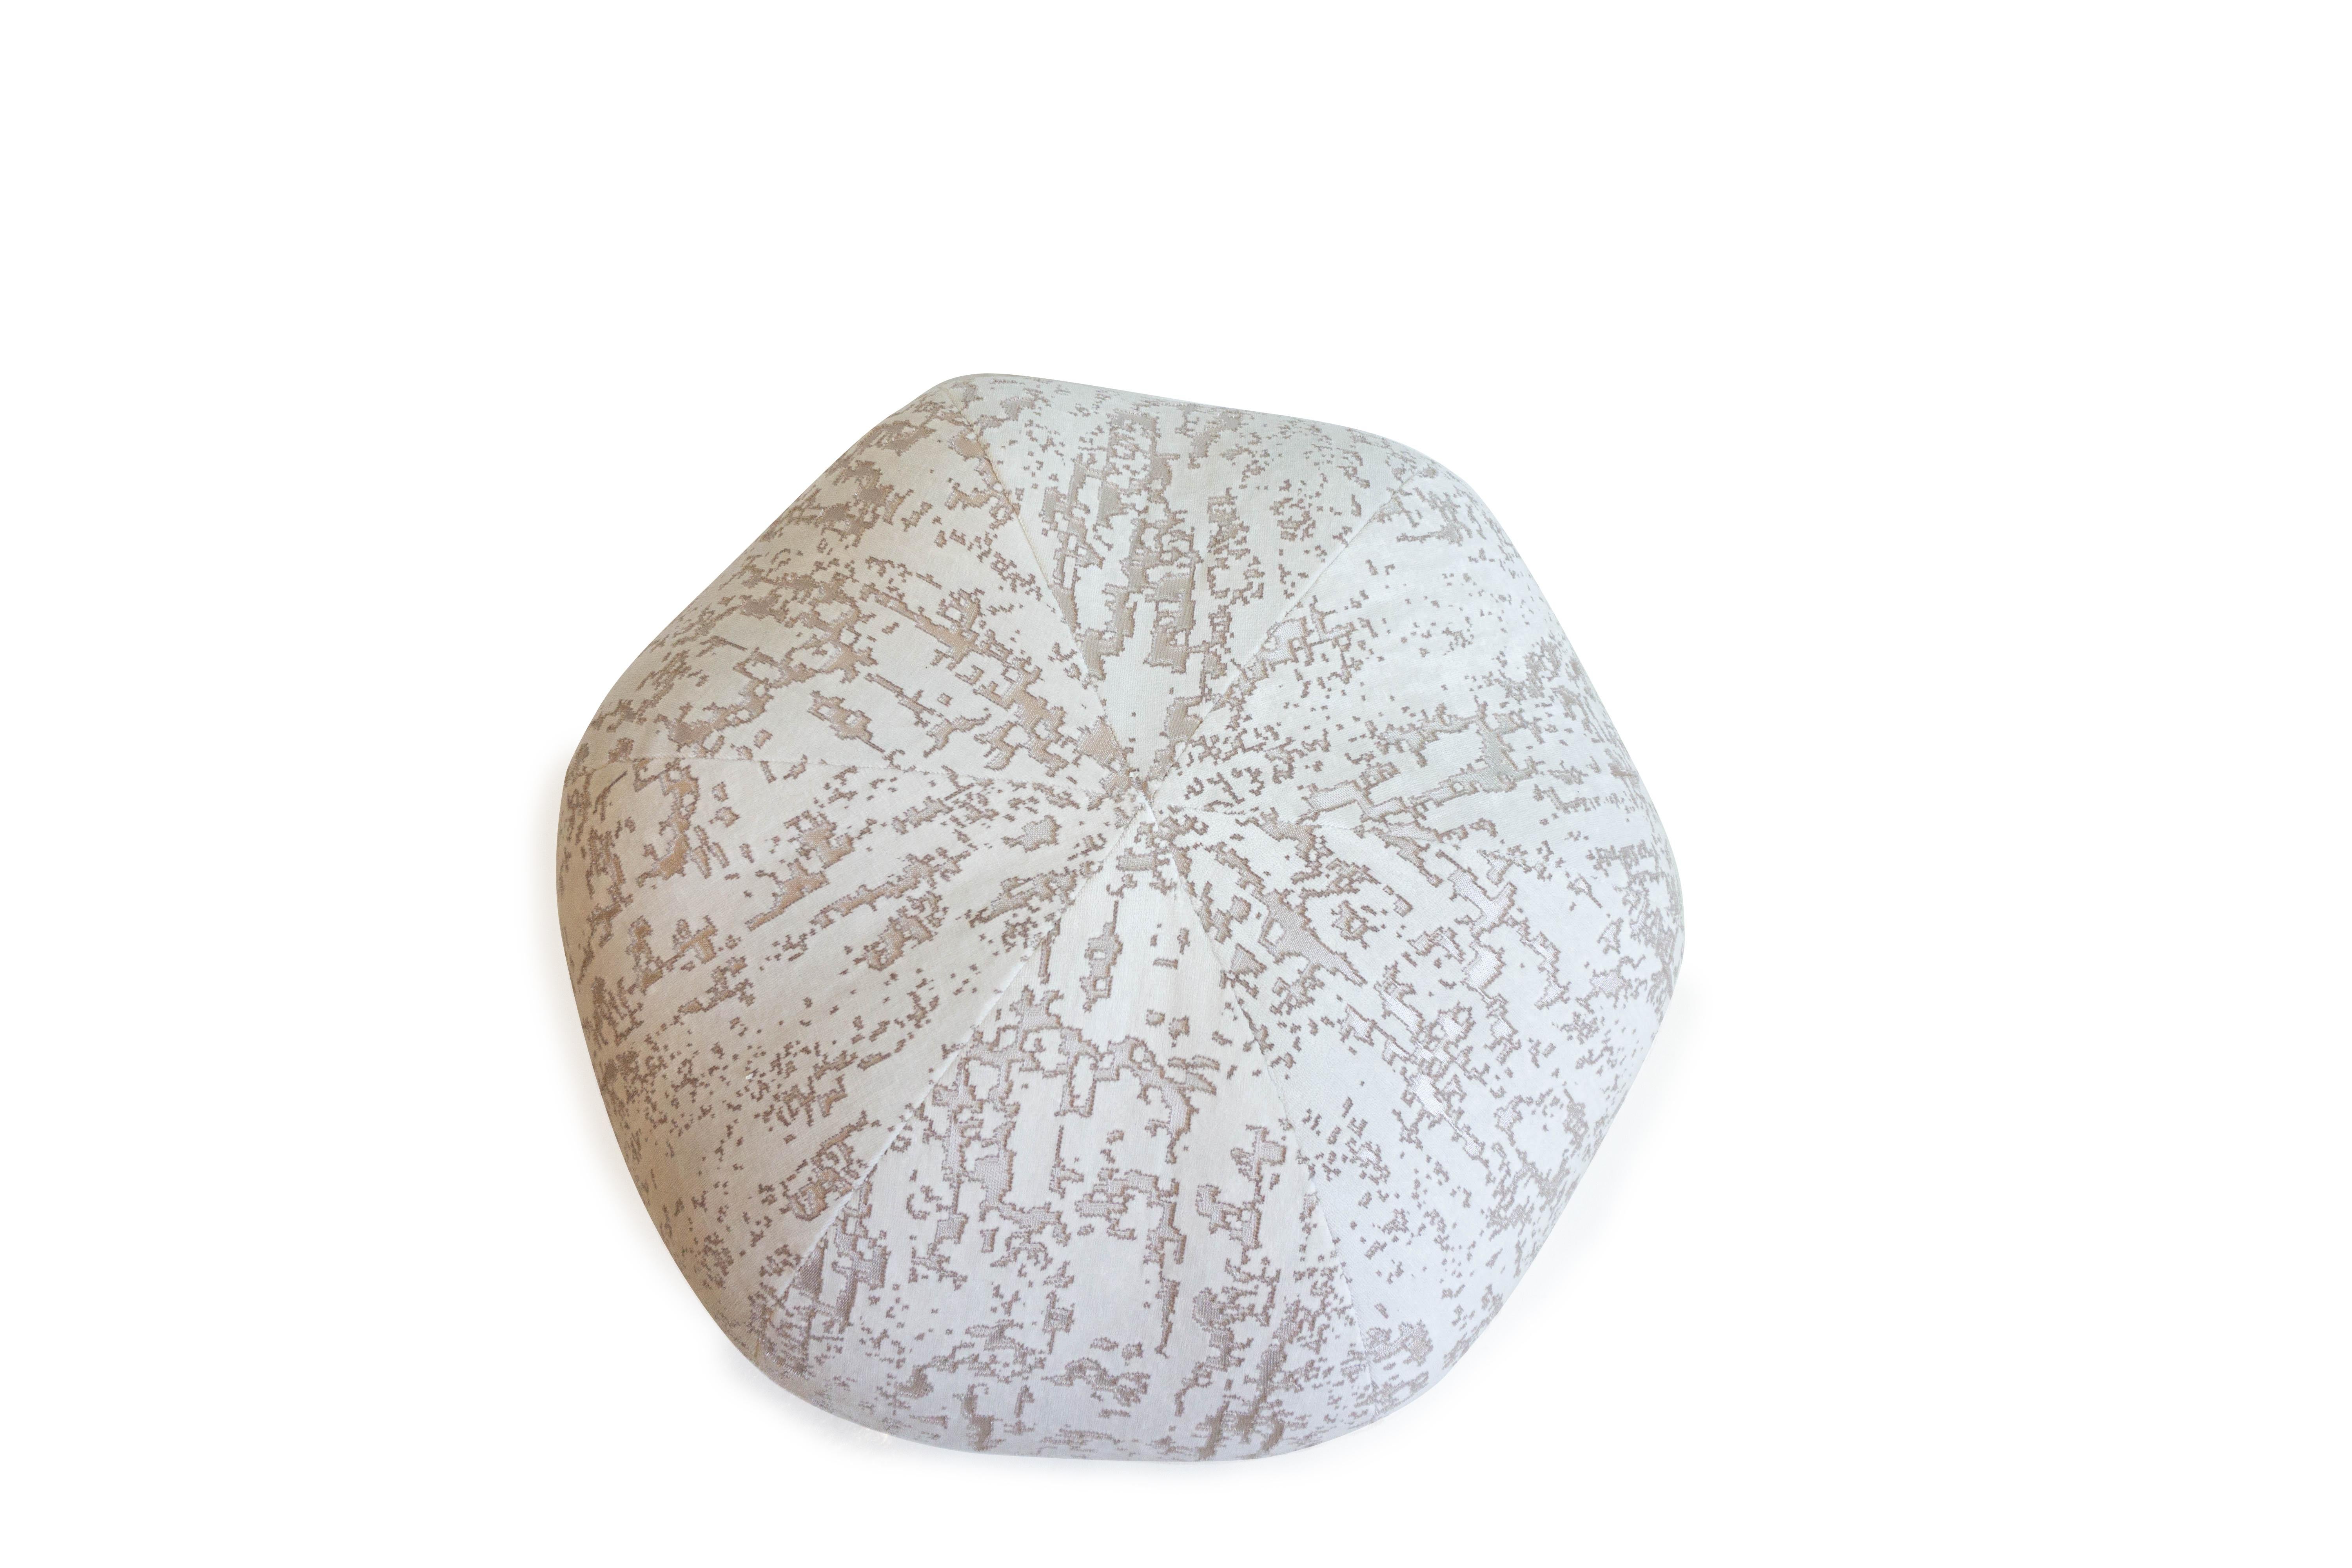 Our small pouf can be used as a seat or an ottoman. Shown in Zinc Grimaldi Moonbeam. Made in our studio in Norwalk, CT. 

Measurements:
Overall: 21”Dia. x 15”H

Price As Shown: $1,200 each
COM Price: $700 each
Customization may change the